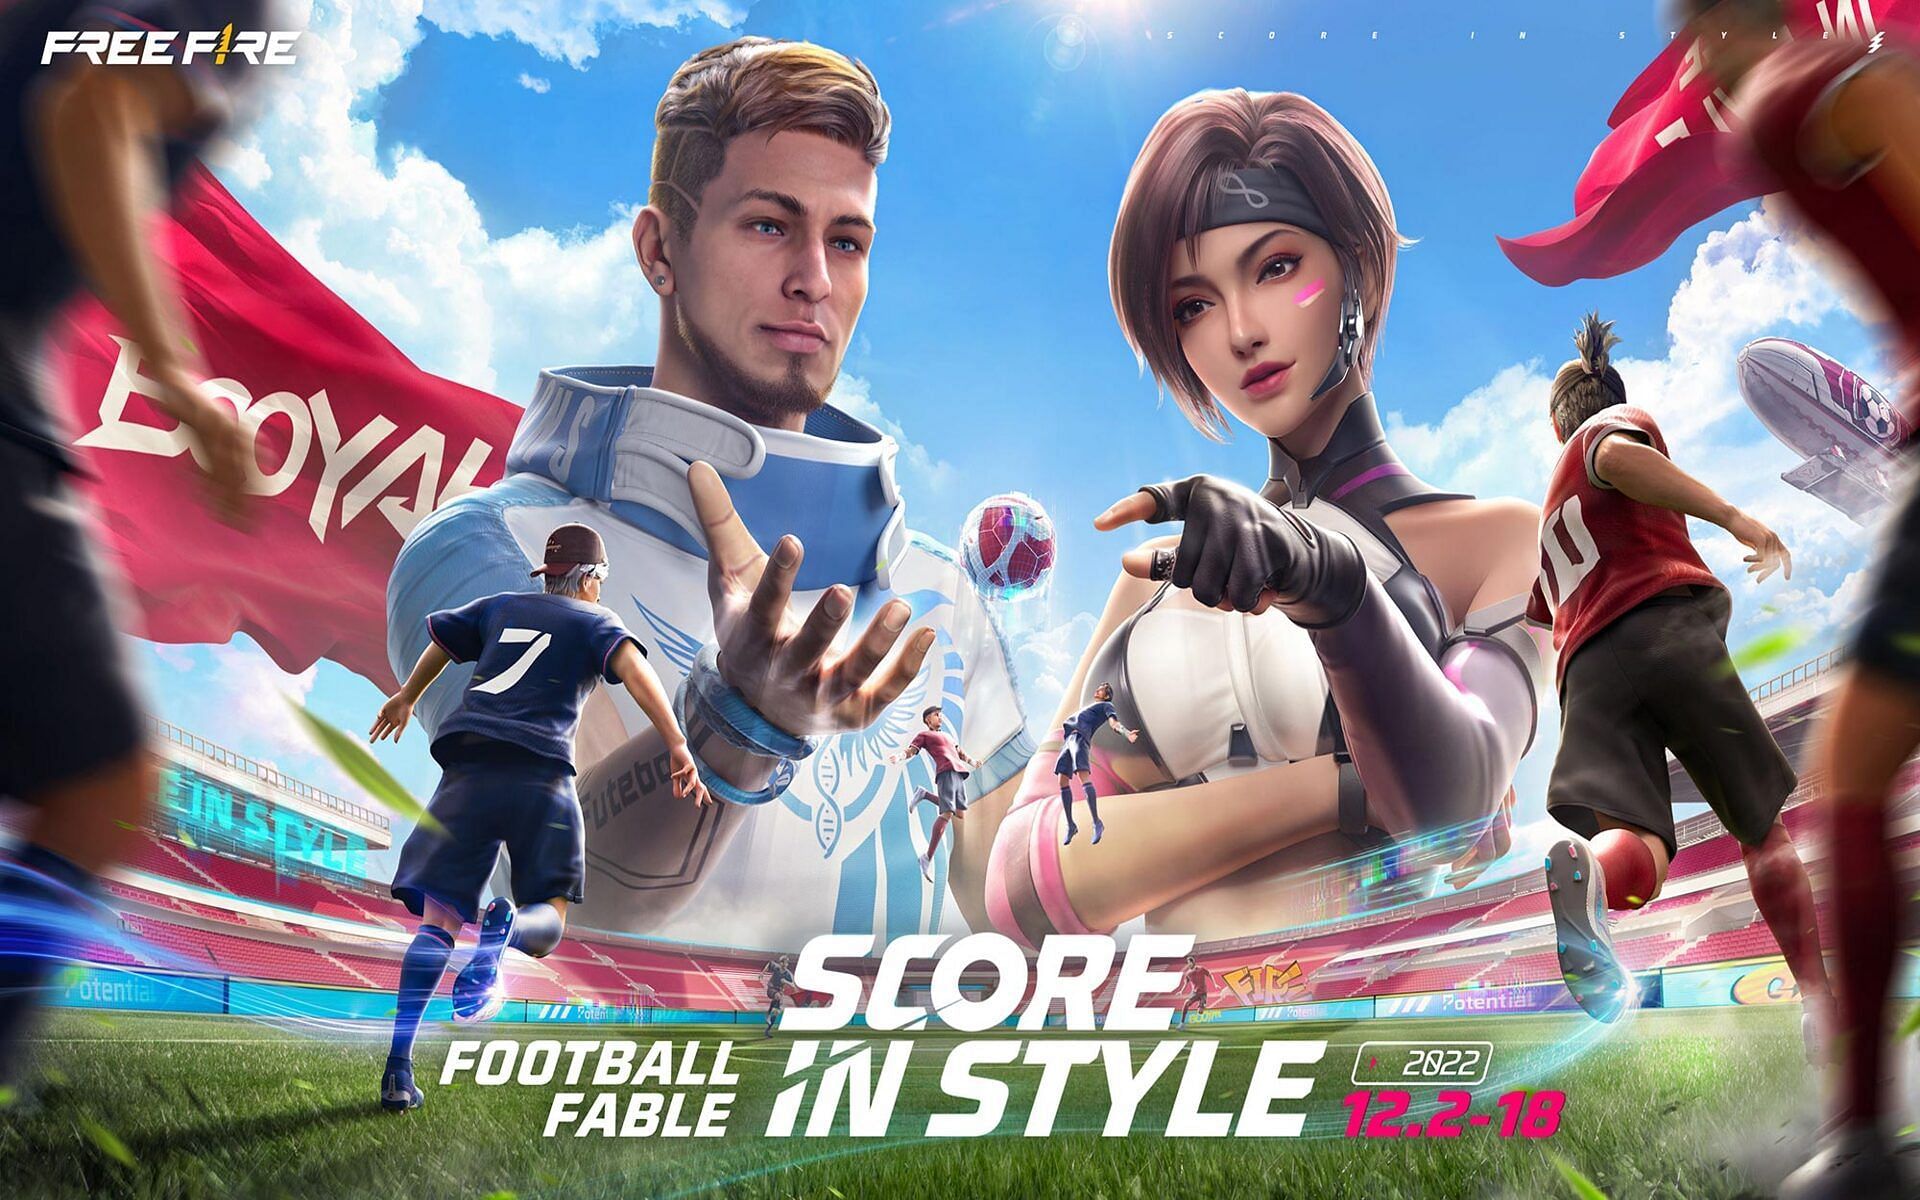 Publishers confirm Football Fable campaign in Free Fire (Image via Garena)